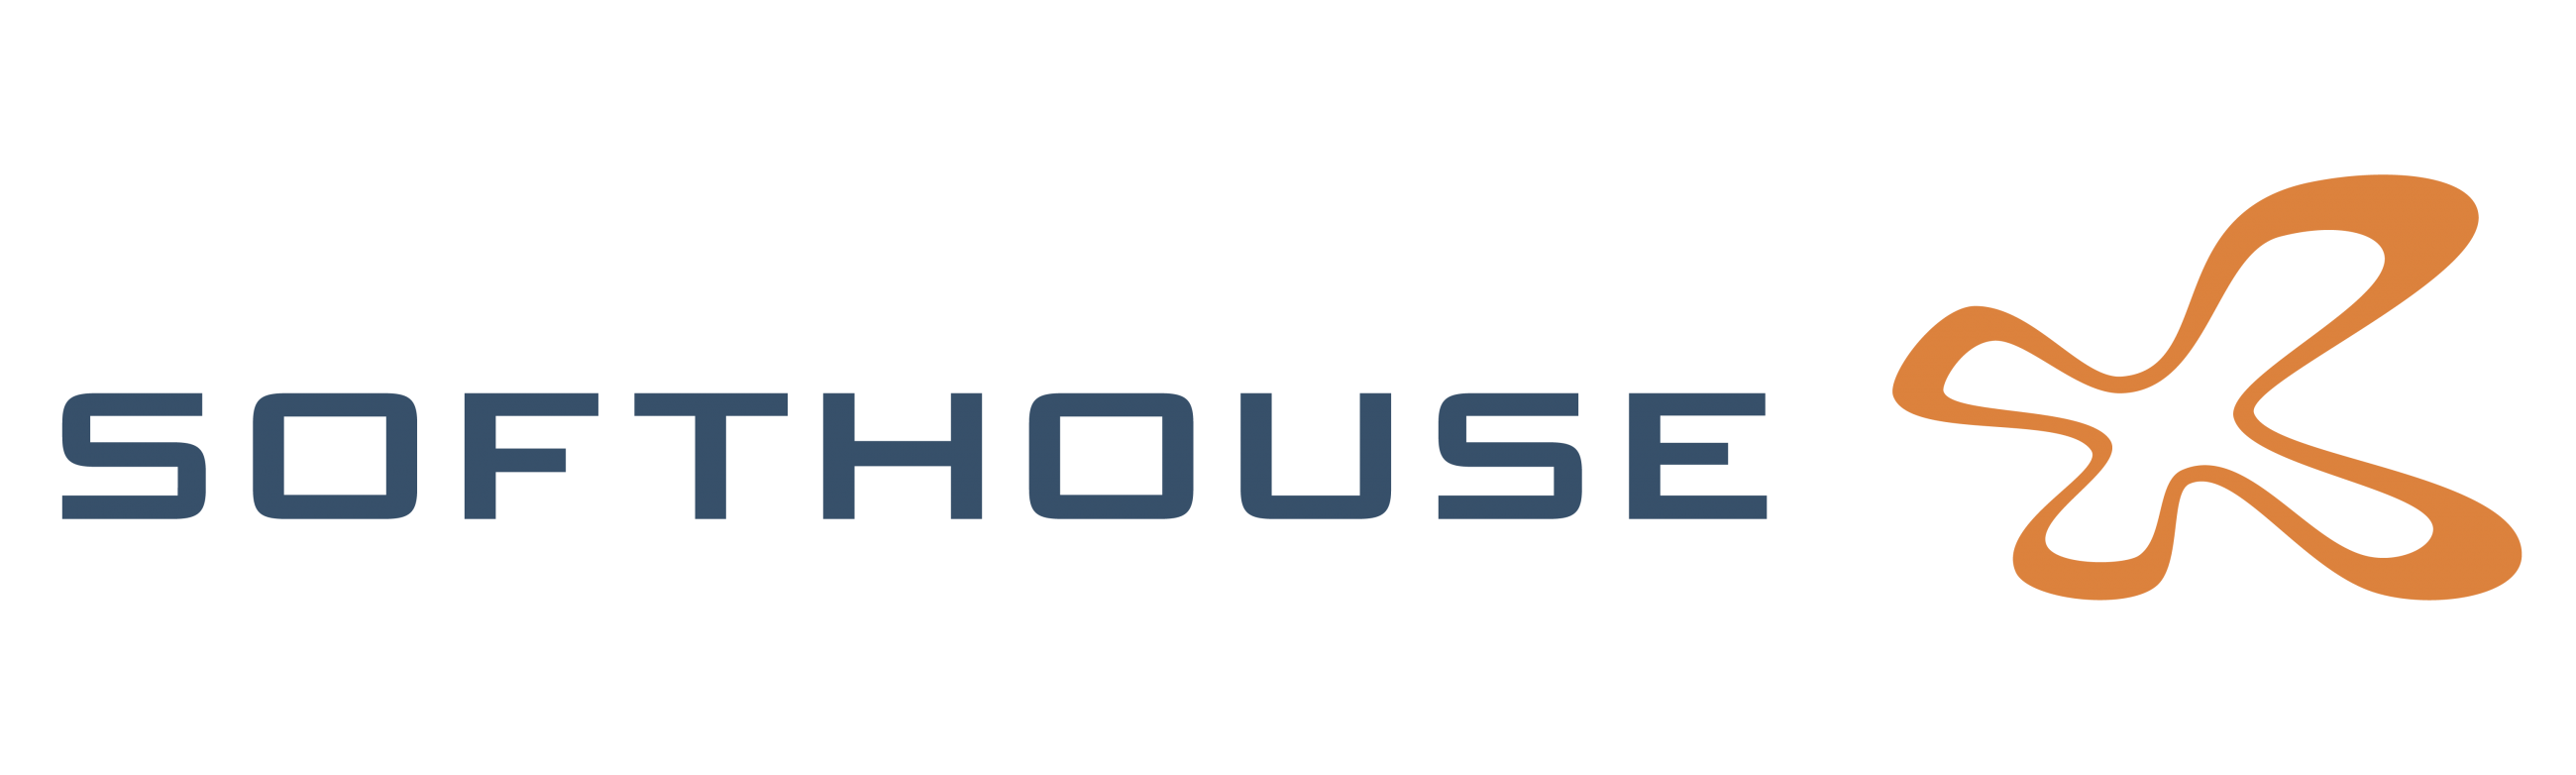 softhouse_logo.png